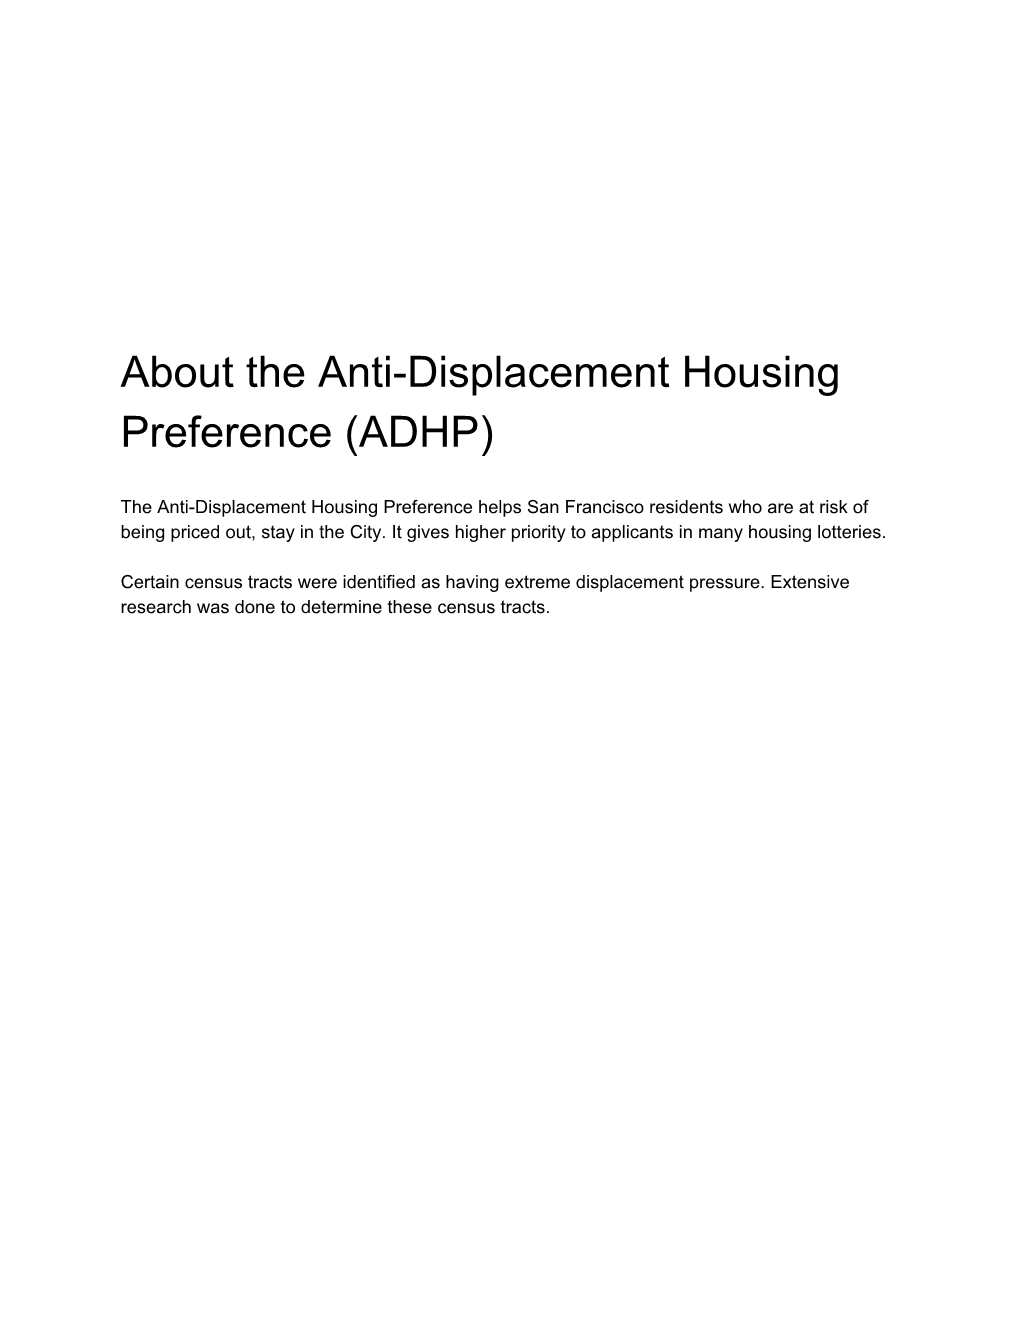 About the Anti-Displacement Housing Preference (ADHP)